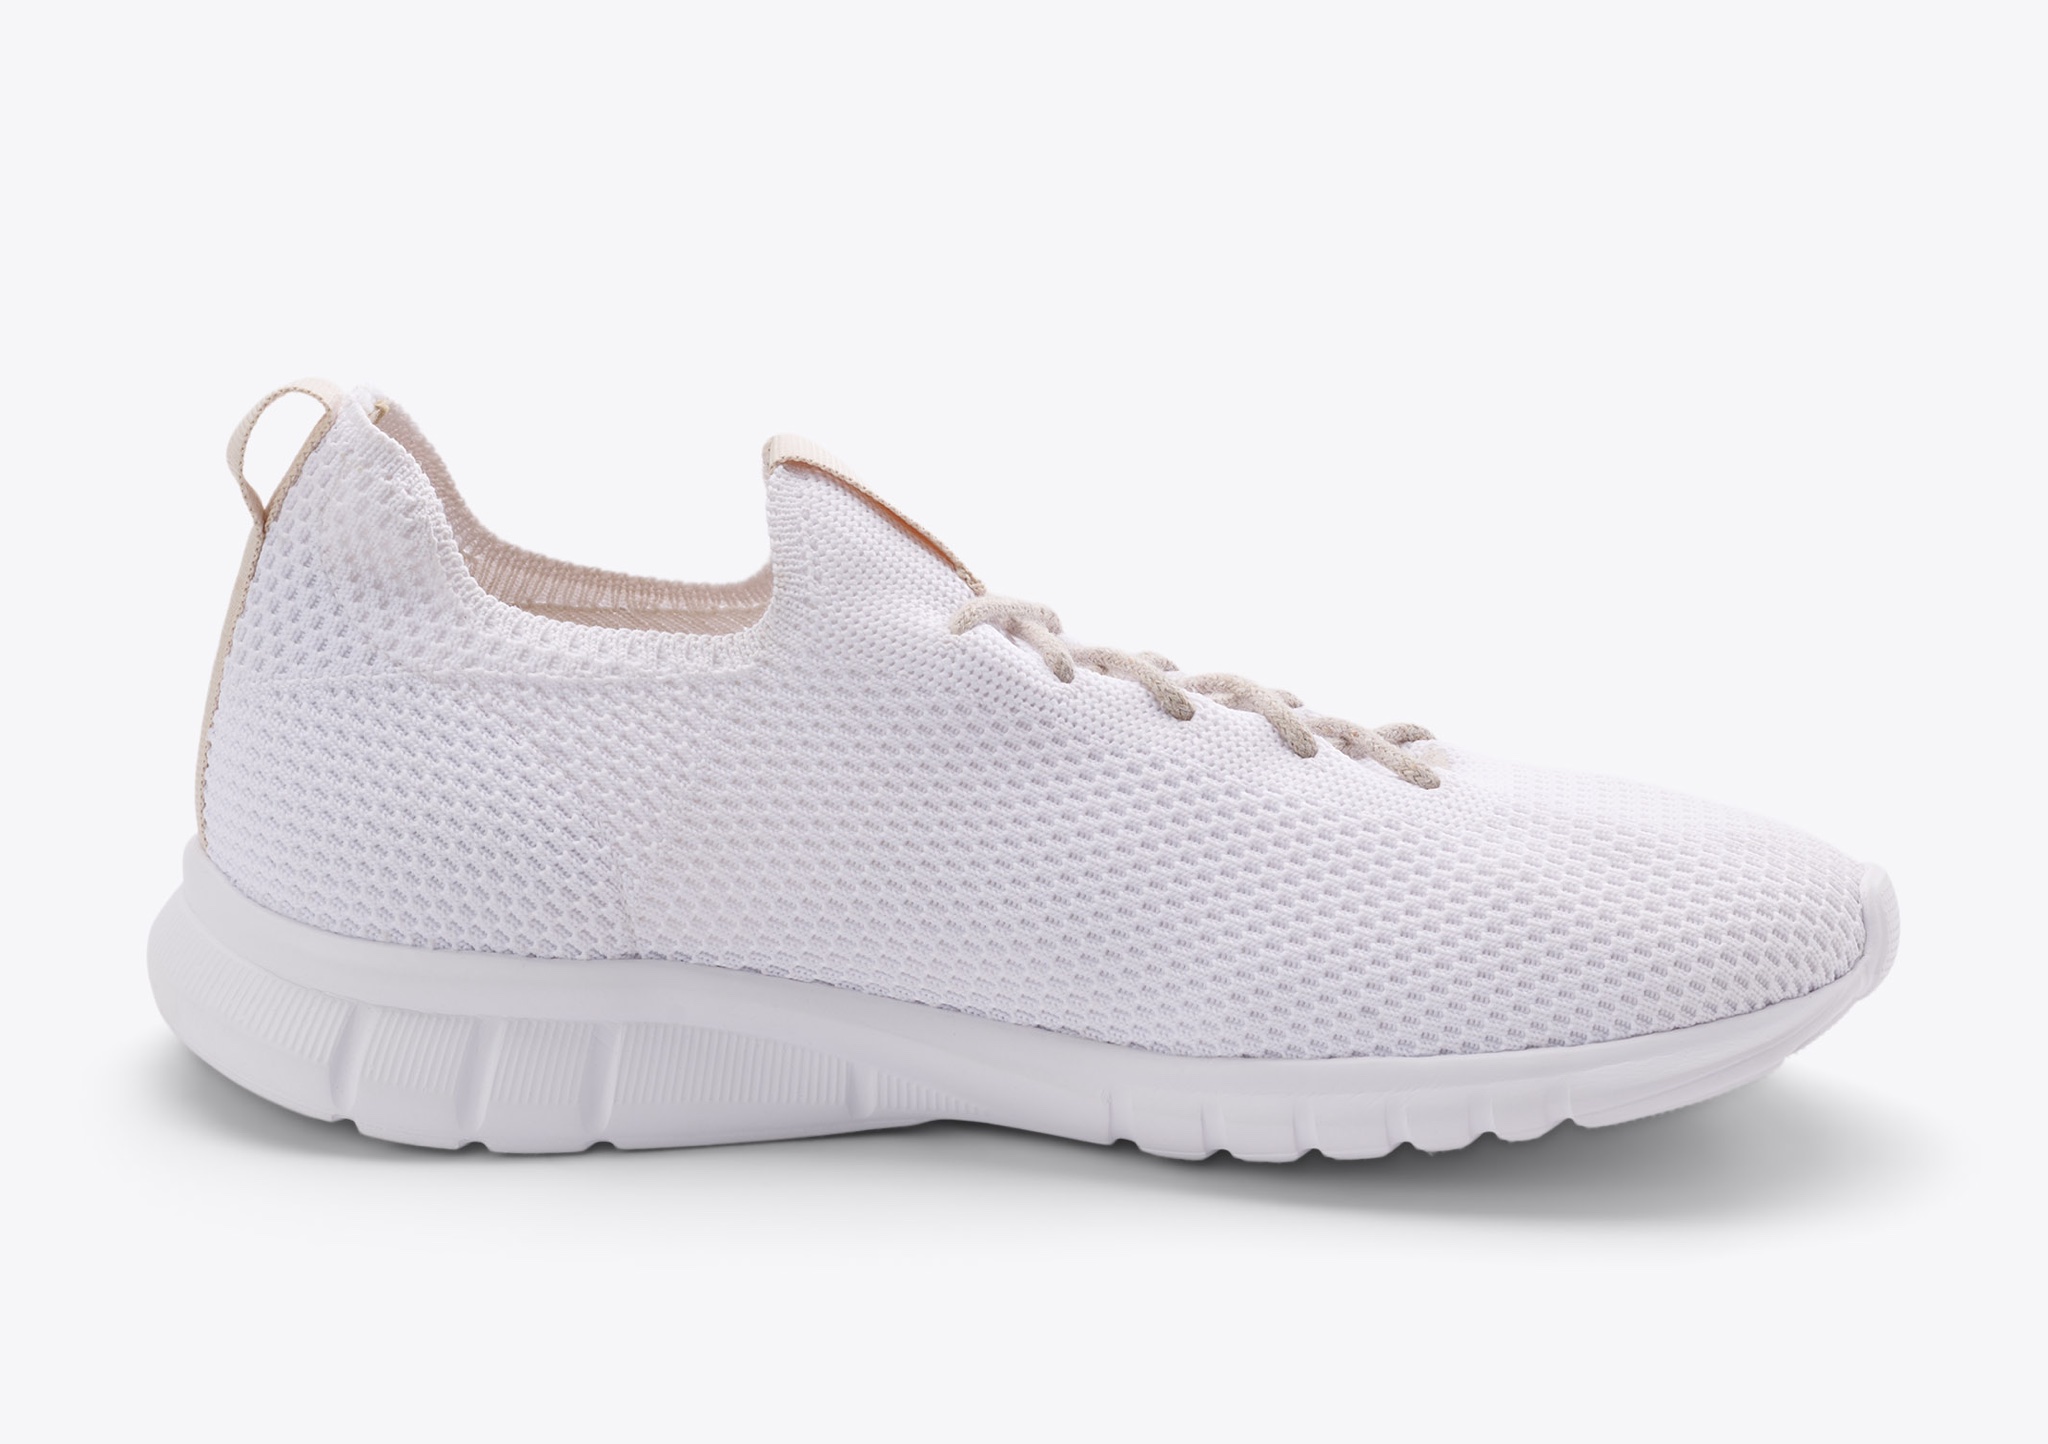 Nisolo Men's All-Day Eco-Knit Sneaker White - Every Nisolo product is built on the foundation of comfort, function, and design. 